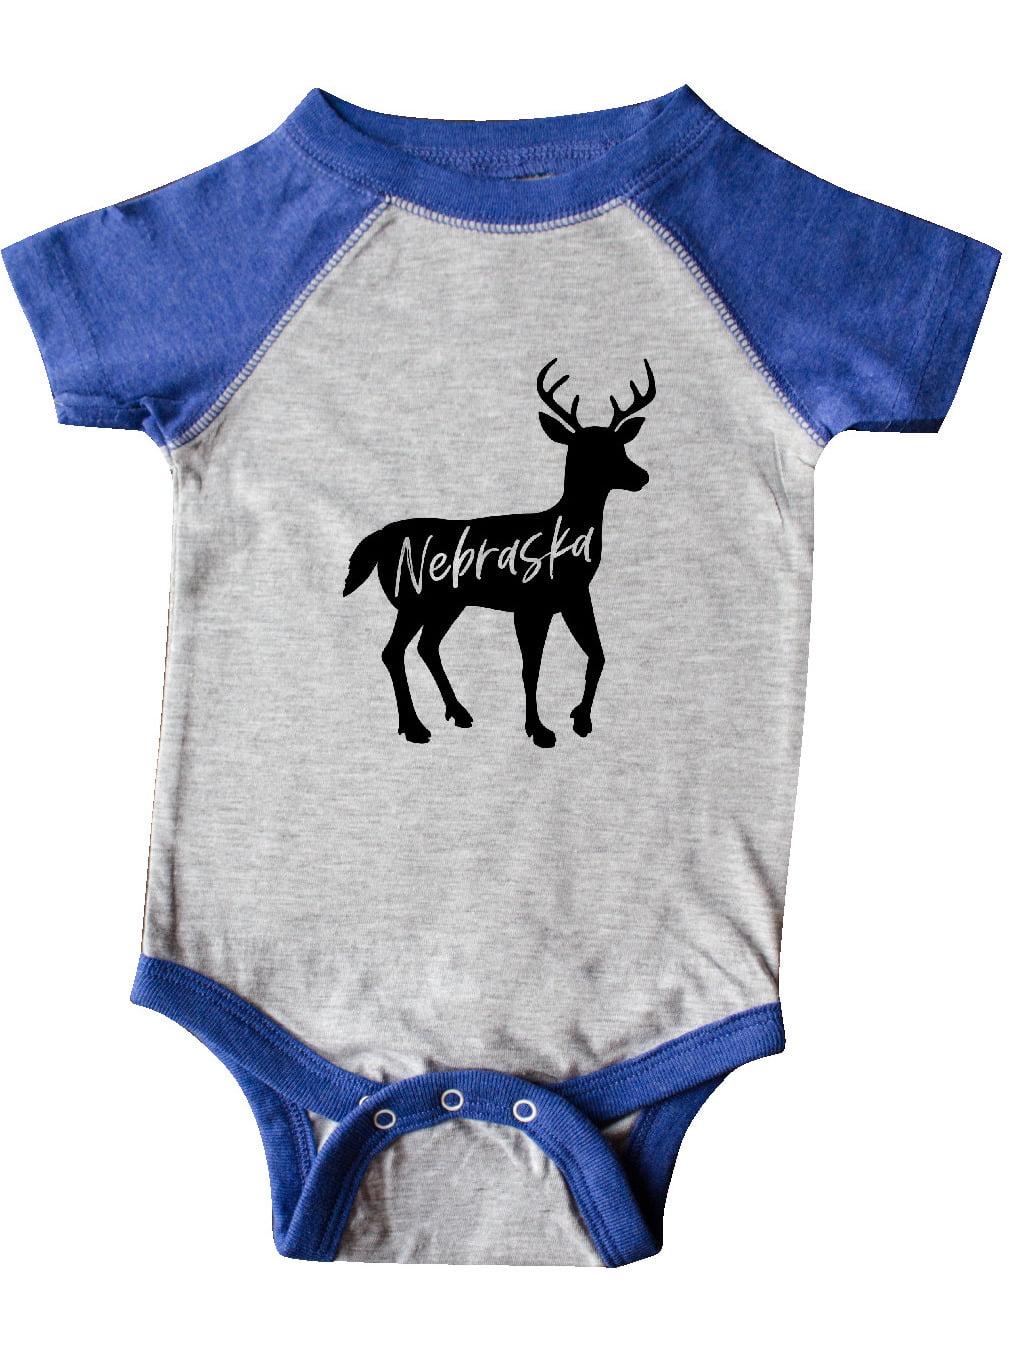 Deer Family 3 Silhouette Baby Newborn Crawling Clothes Sleeveless Romper Bodysuit Rompers Jumpsuit Black